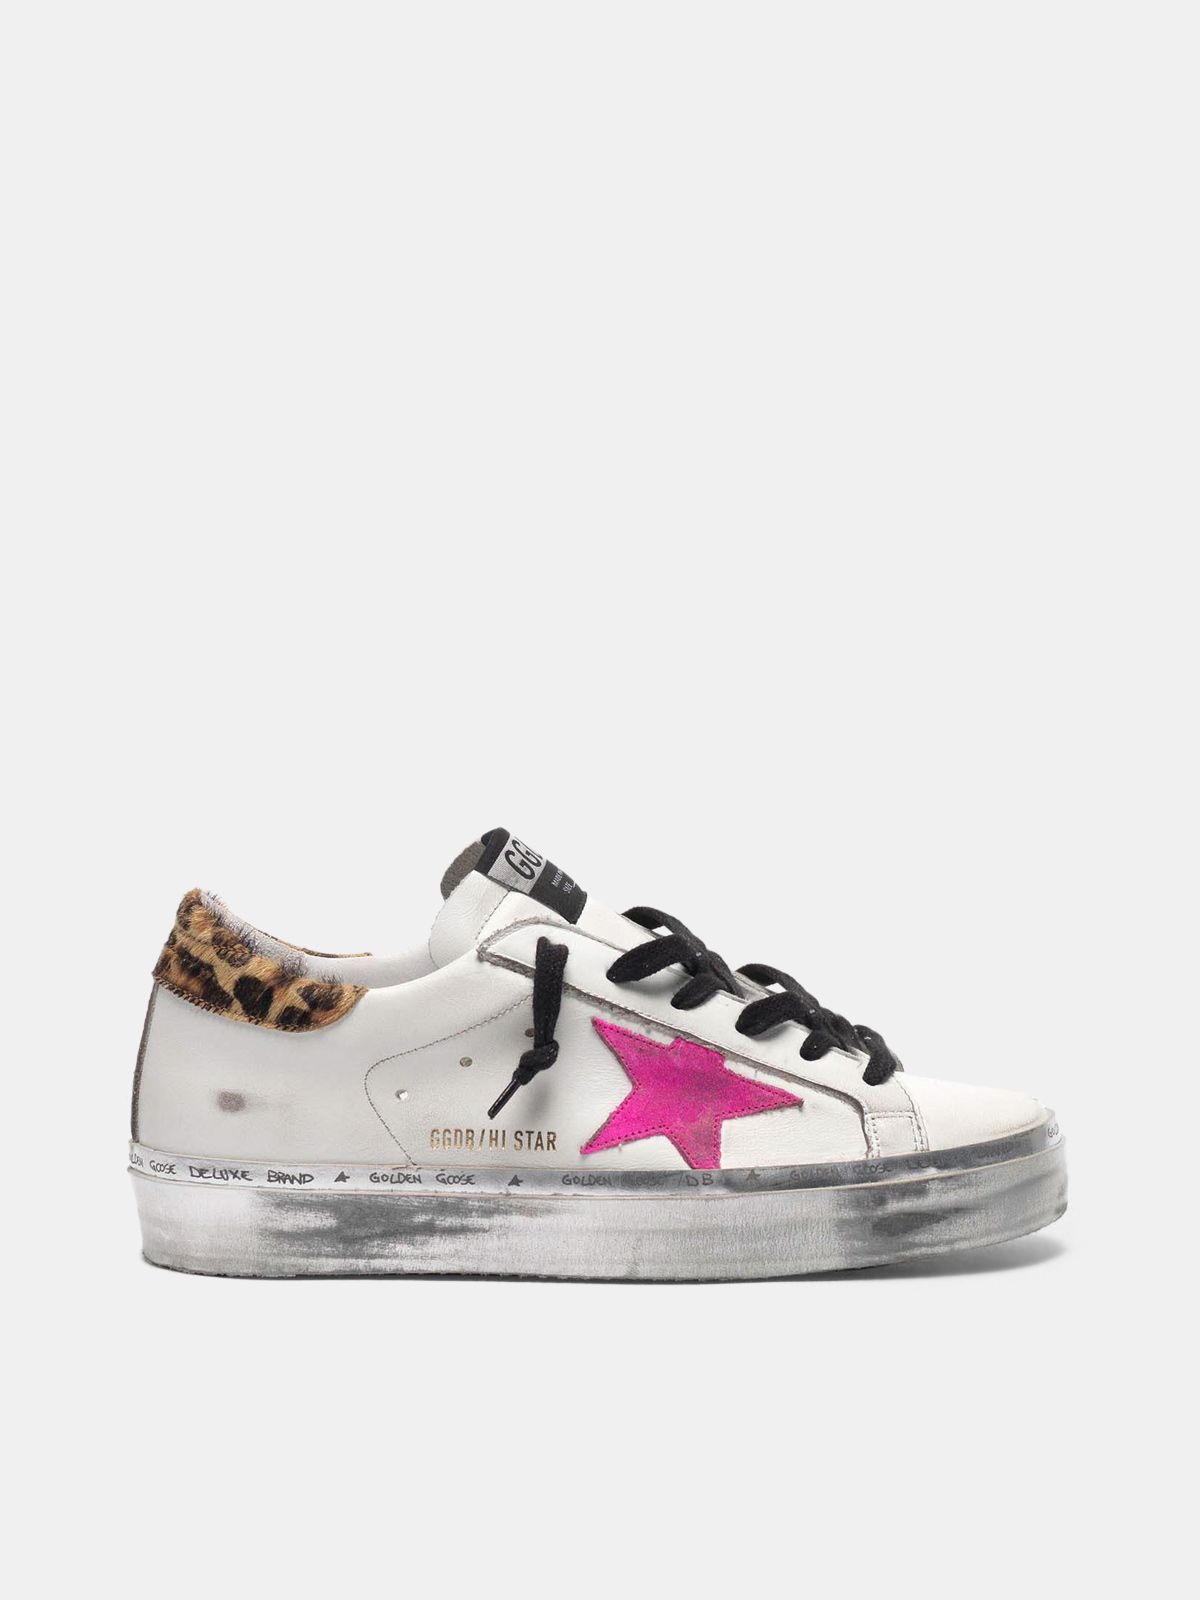 golden goose leopard-print fuchsia and Star sneakers tab star with heel Hi